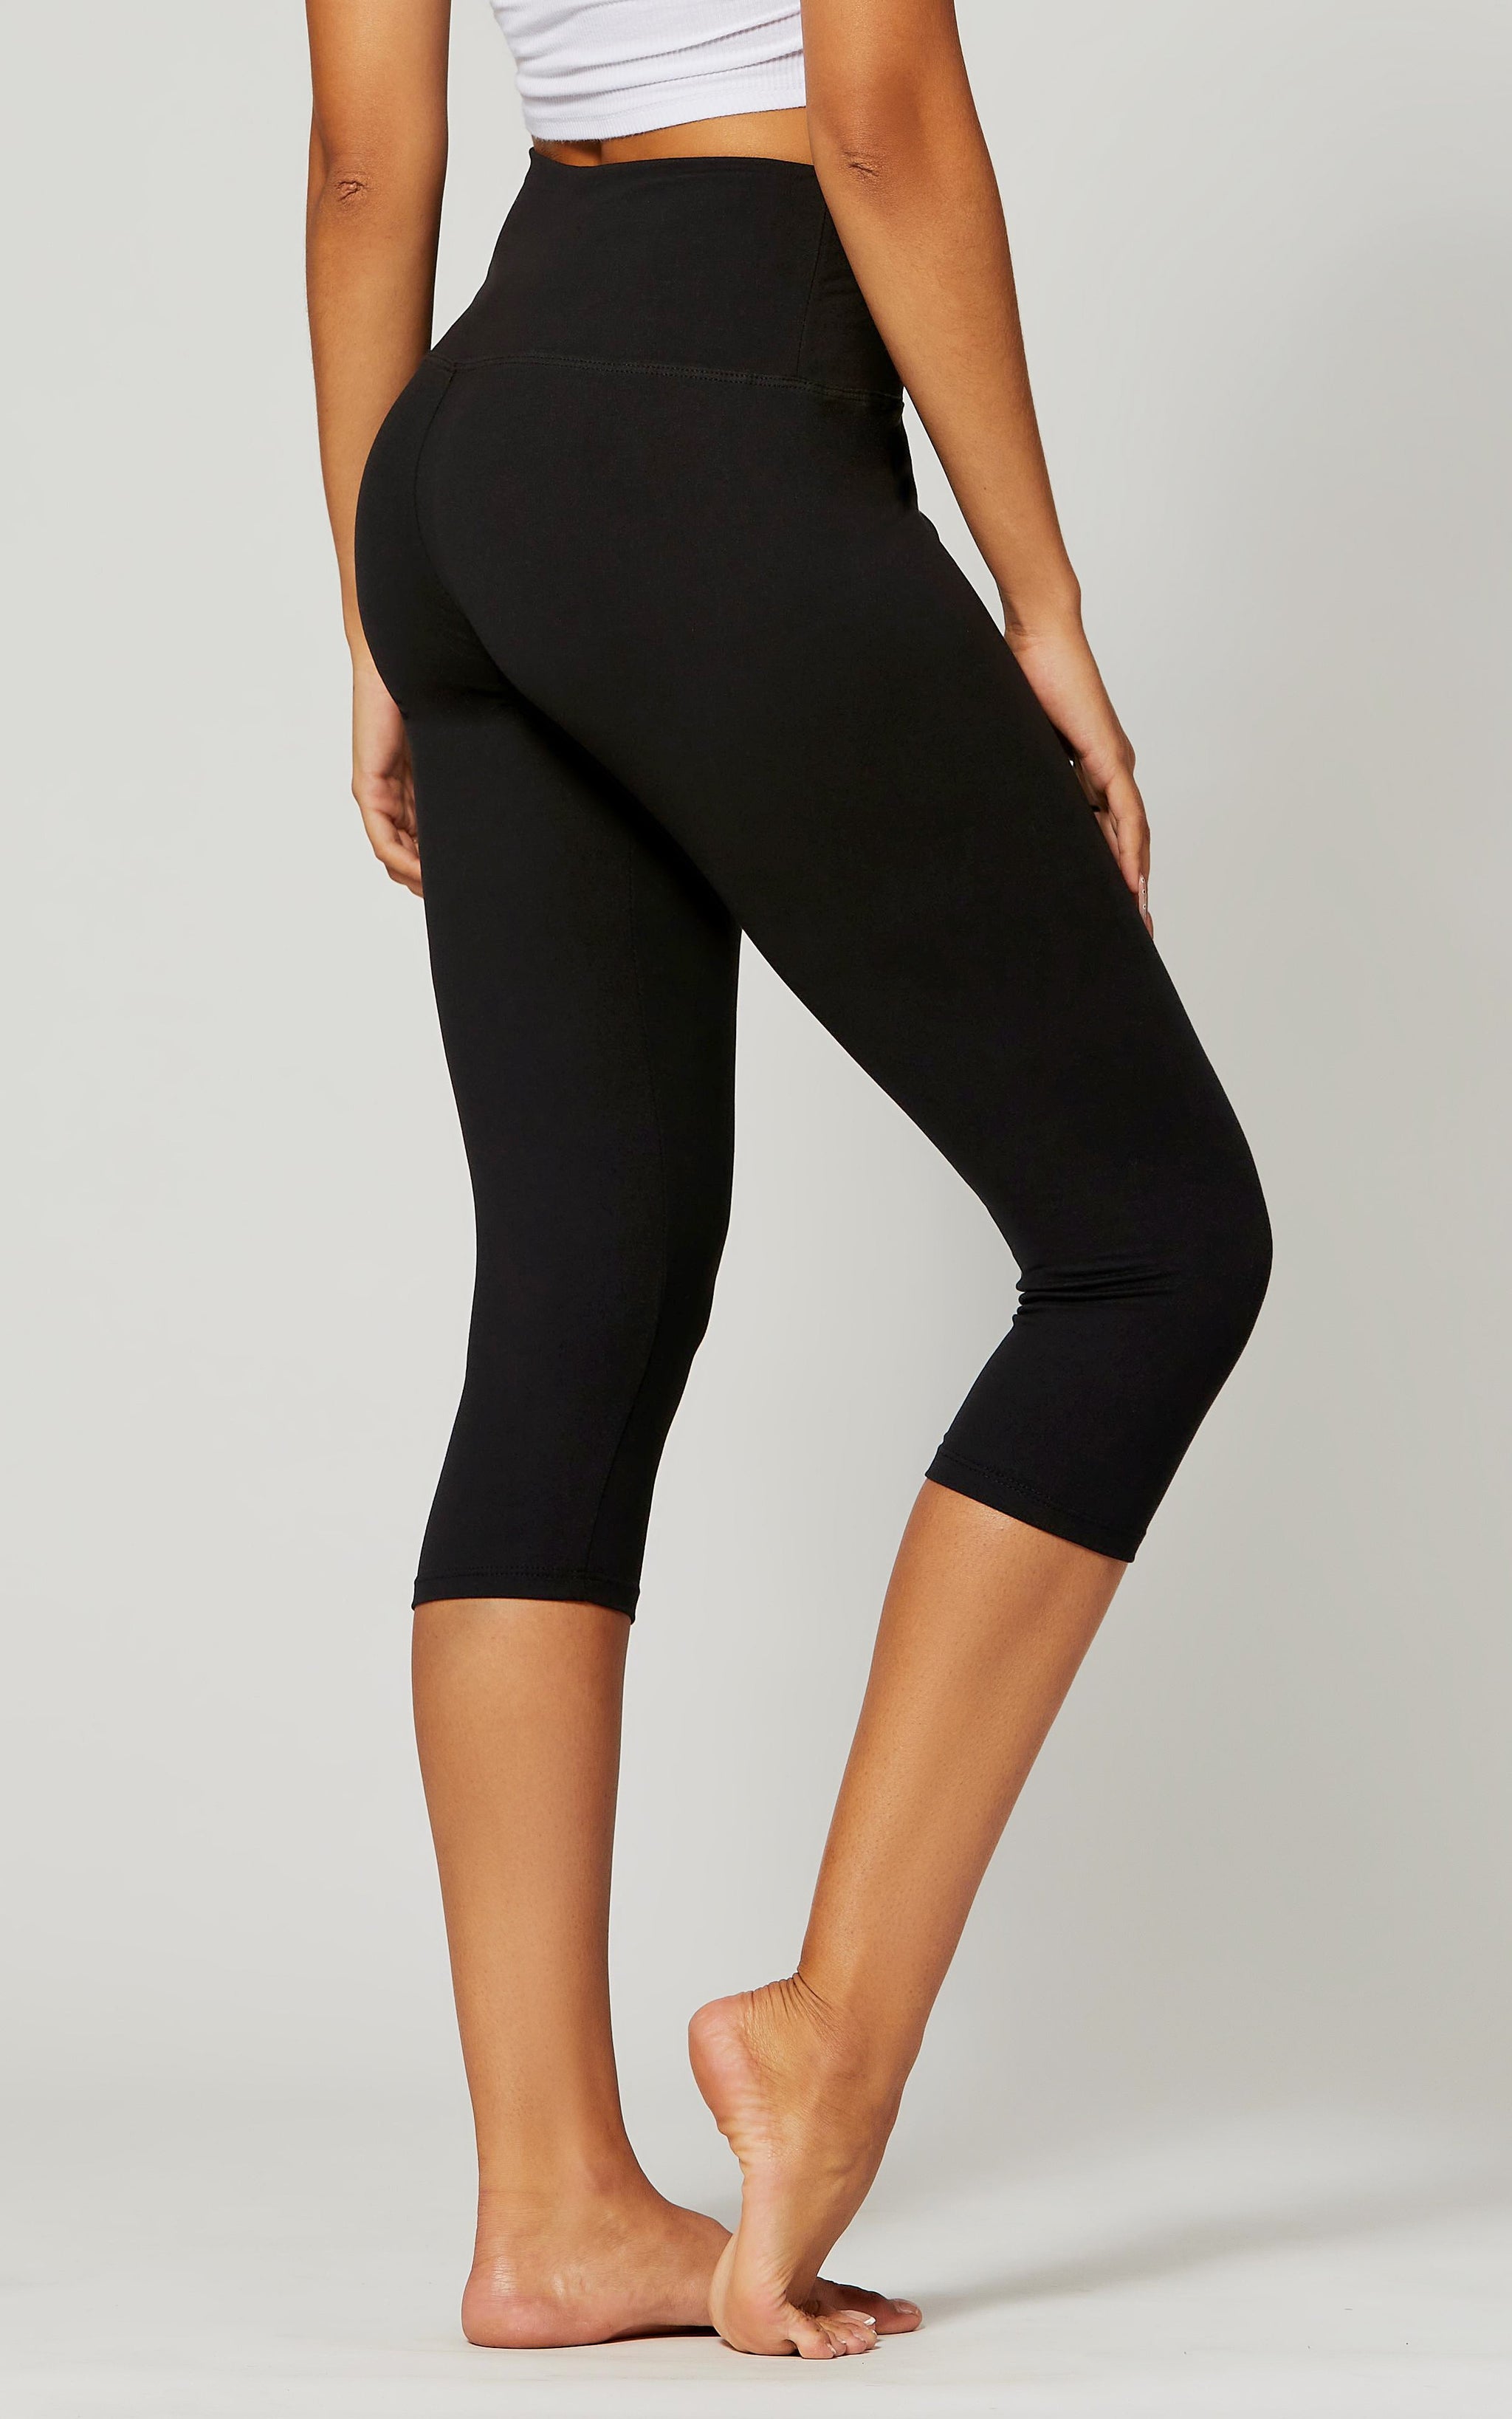 Women's Black Ripped Capri Leggings. • Elastic Waistband • Long, Skinny leg  design • Distressing accents on front • Pull Up Style • High Waisted •  Pull-on styling • Nylon/Spandex • Hand